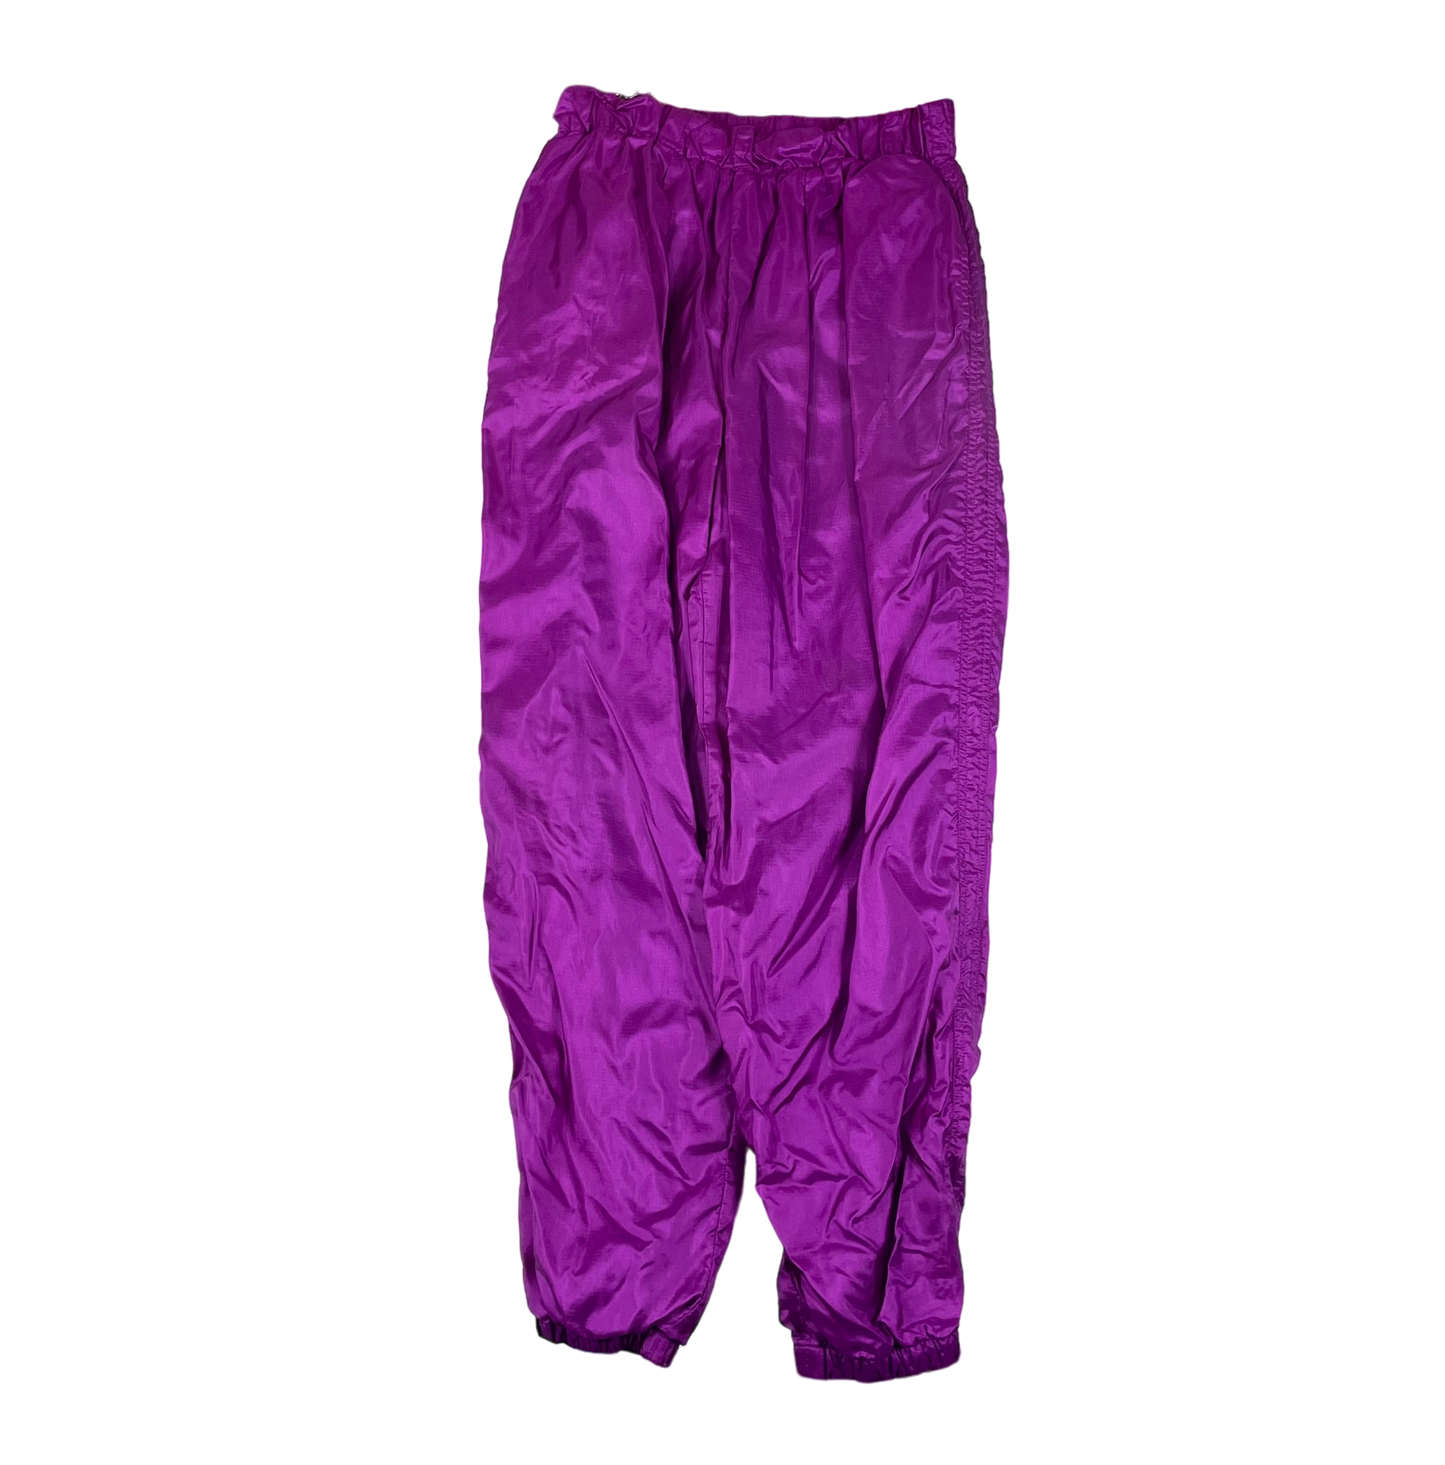 90s Vintage Purple/Pink Nike Trackpants (Women’s Large/Men’s Small)